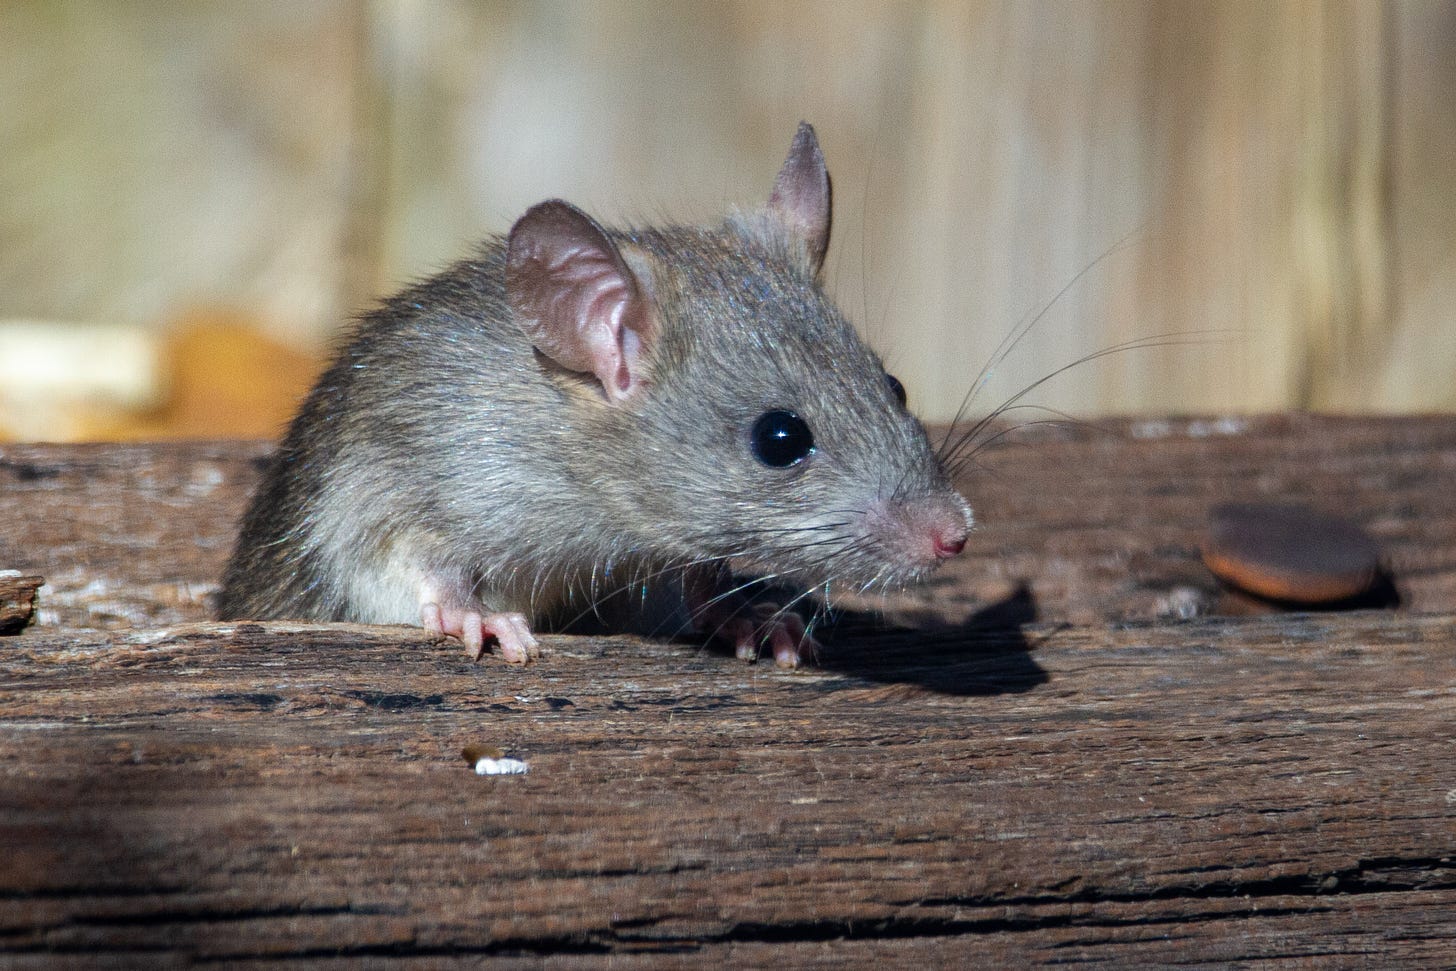 Rat looks over a piece of wood.